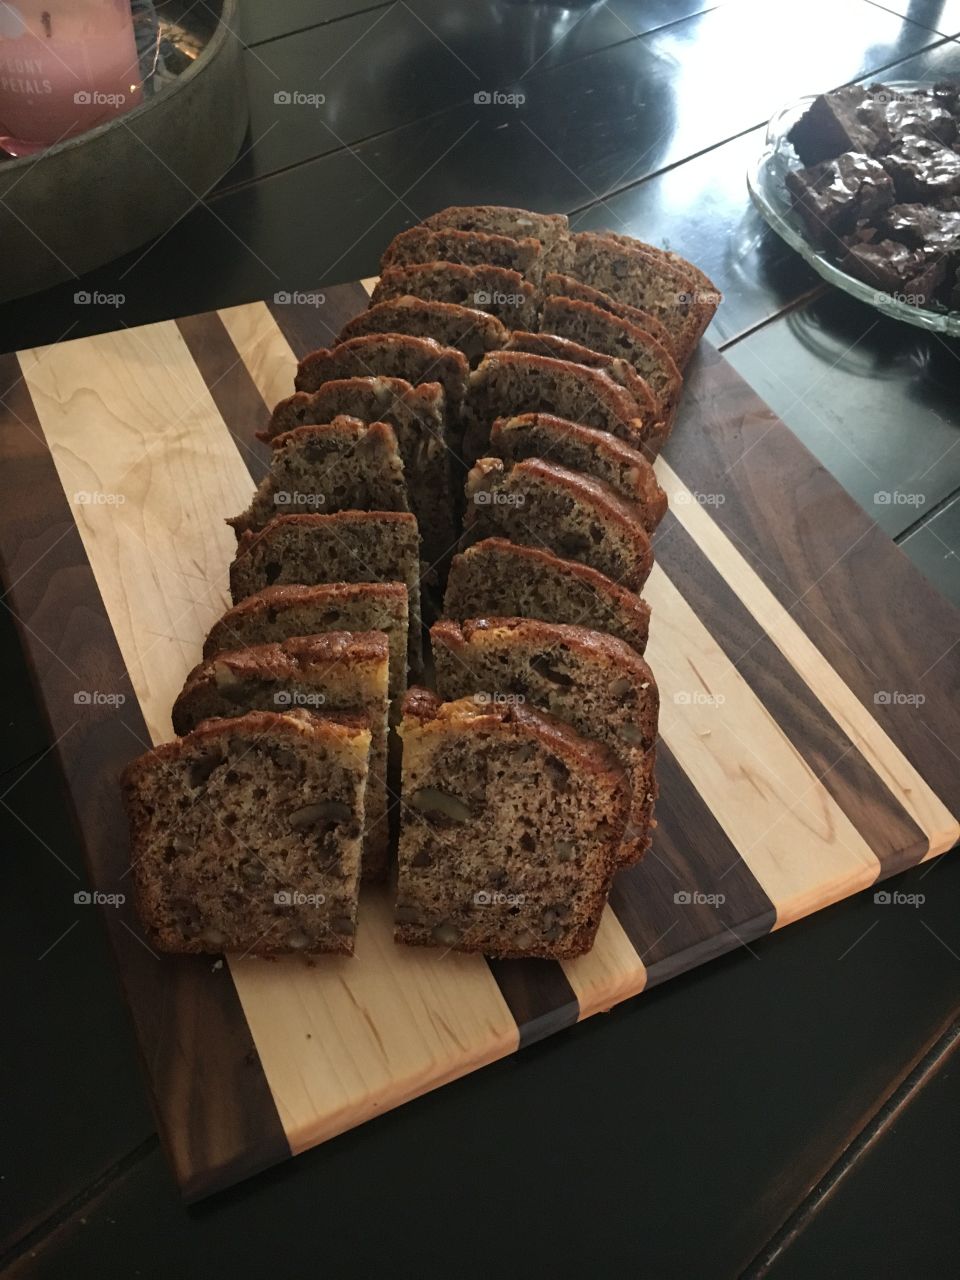 Delicious homemade banana bread sitting atop a homemade wood cutting board.